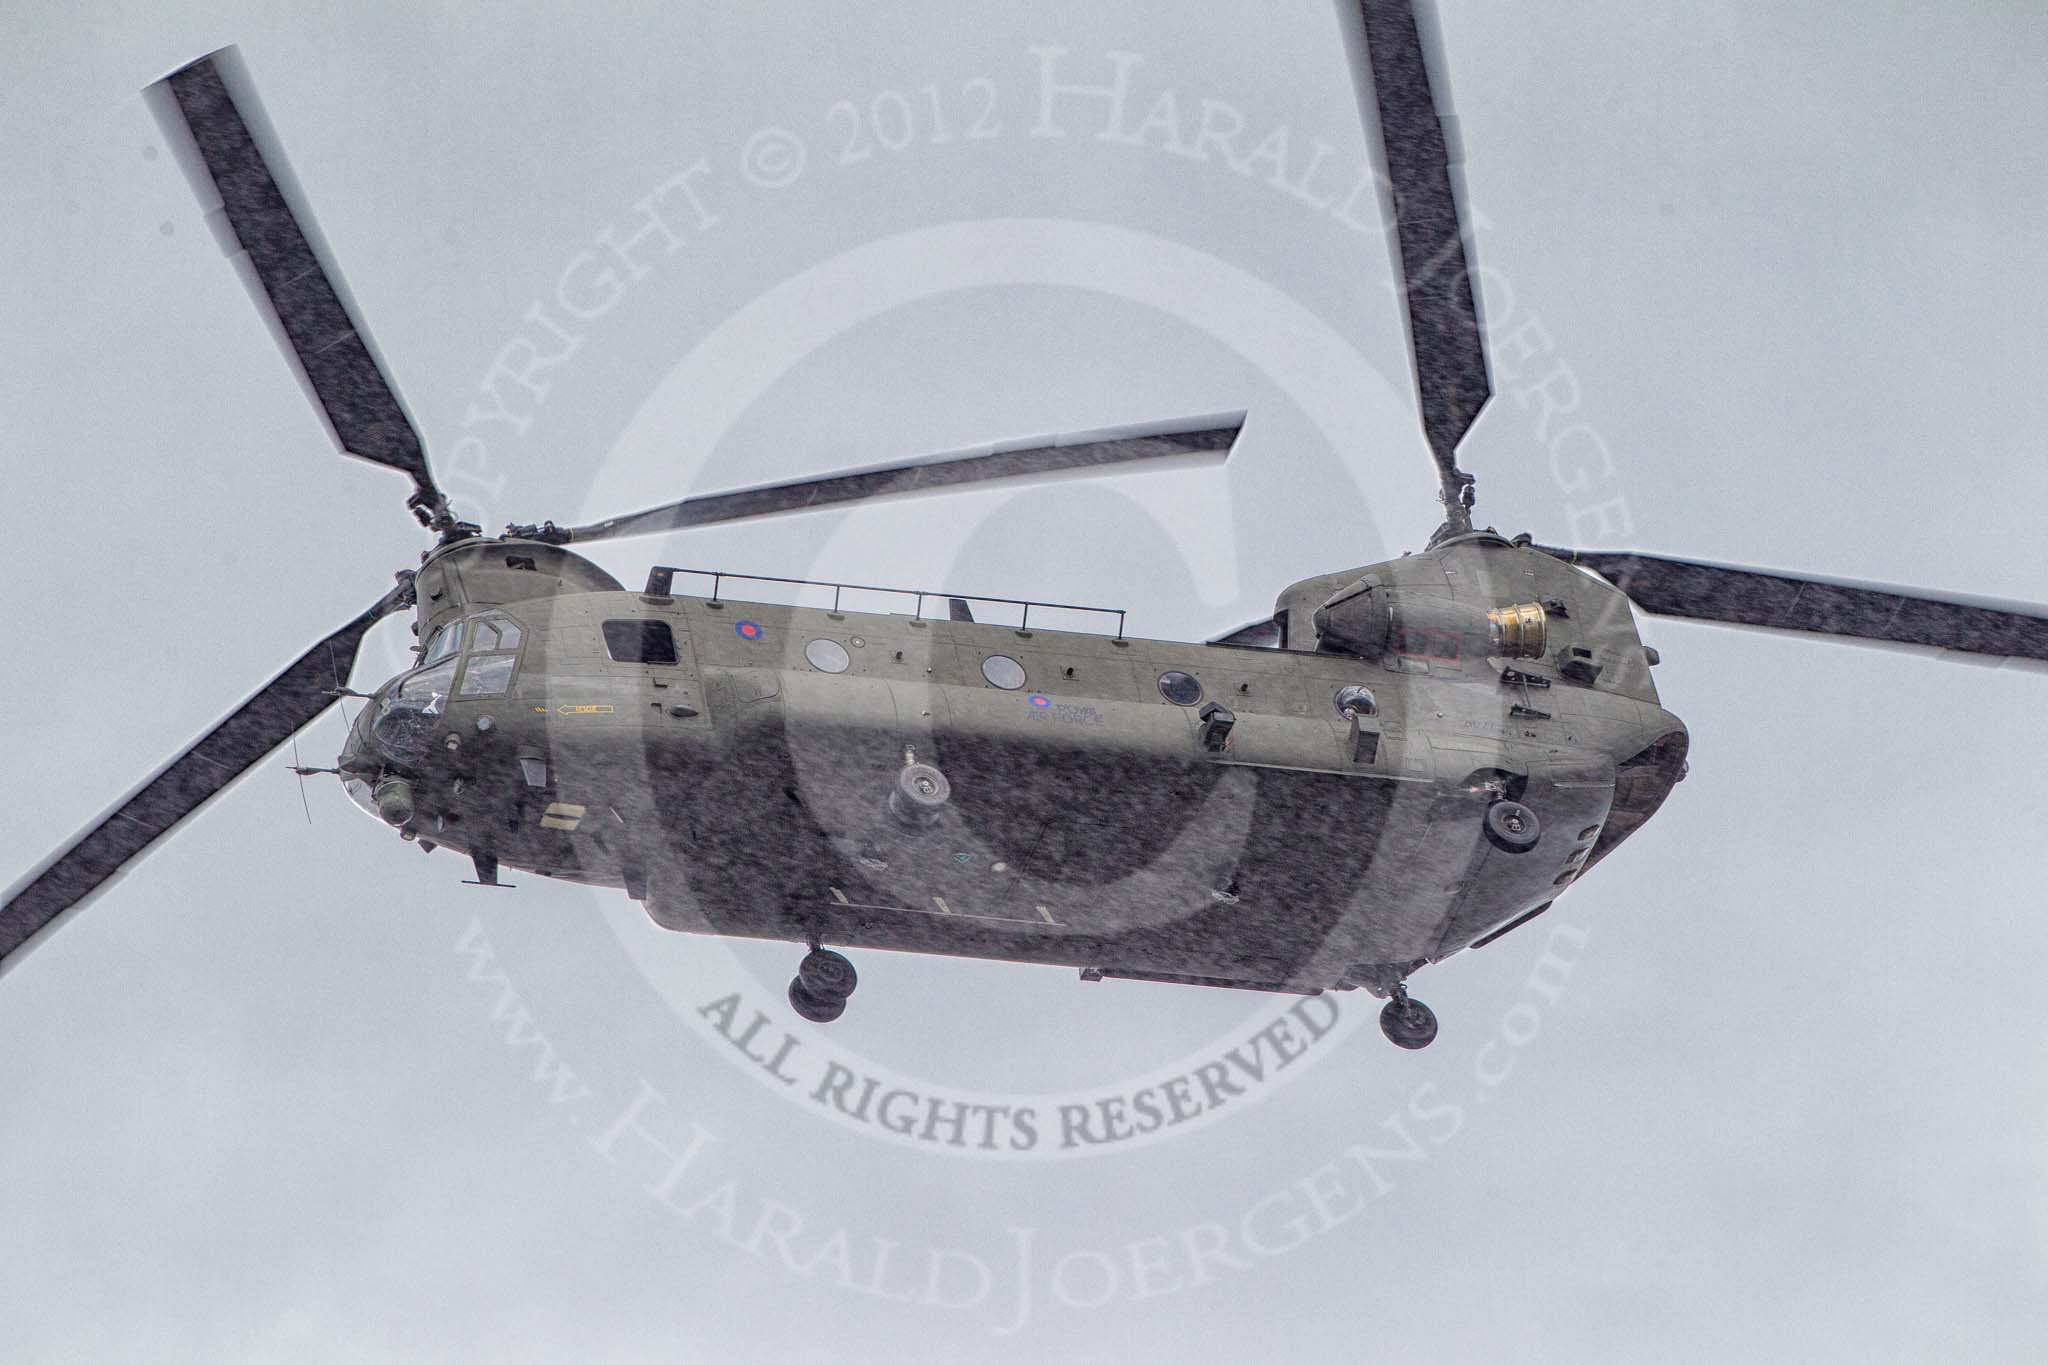 Trooping the Colour 2012: The Flypast: Chinook HD.2 helicopter ZH777 during a heavy rain shower..
Horse Guards Parade, Westminster,
London SW1,

United Kingdom,
on 16 June 2012 at 12:59, image #719